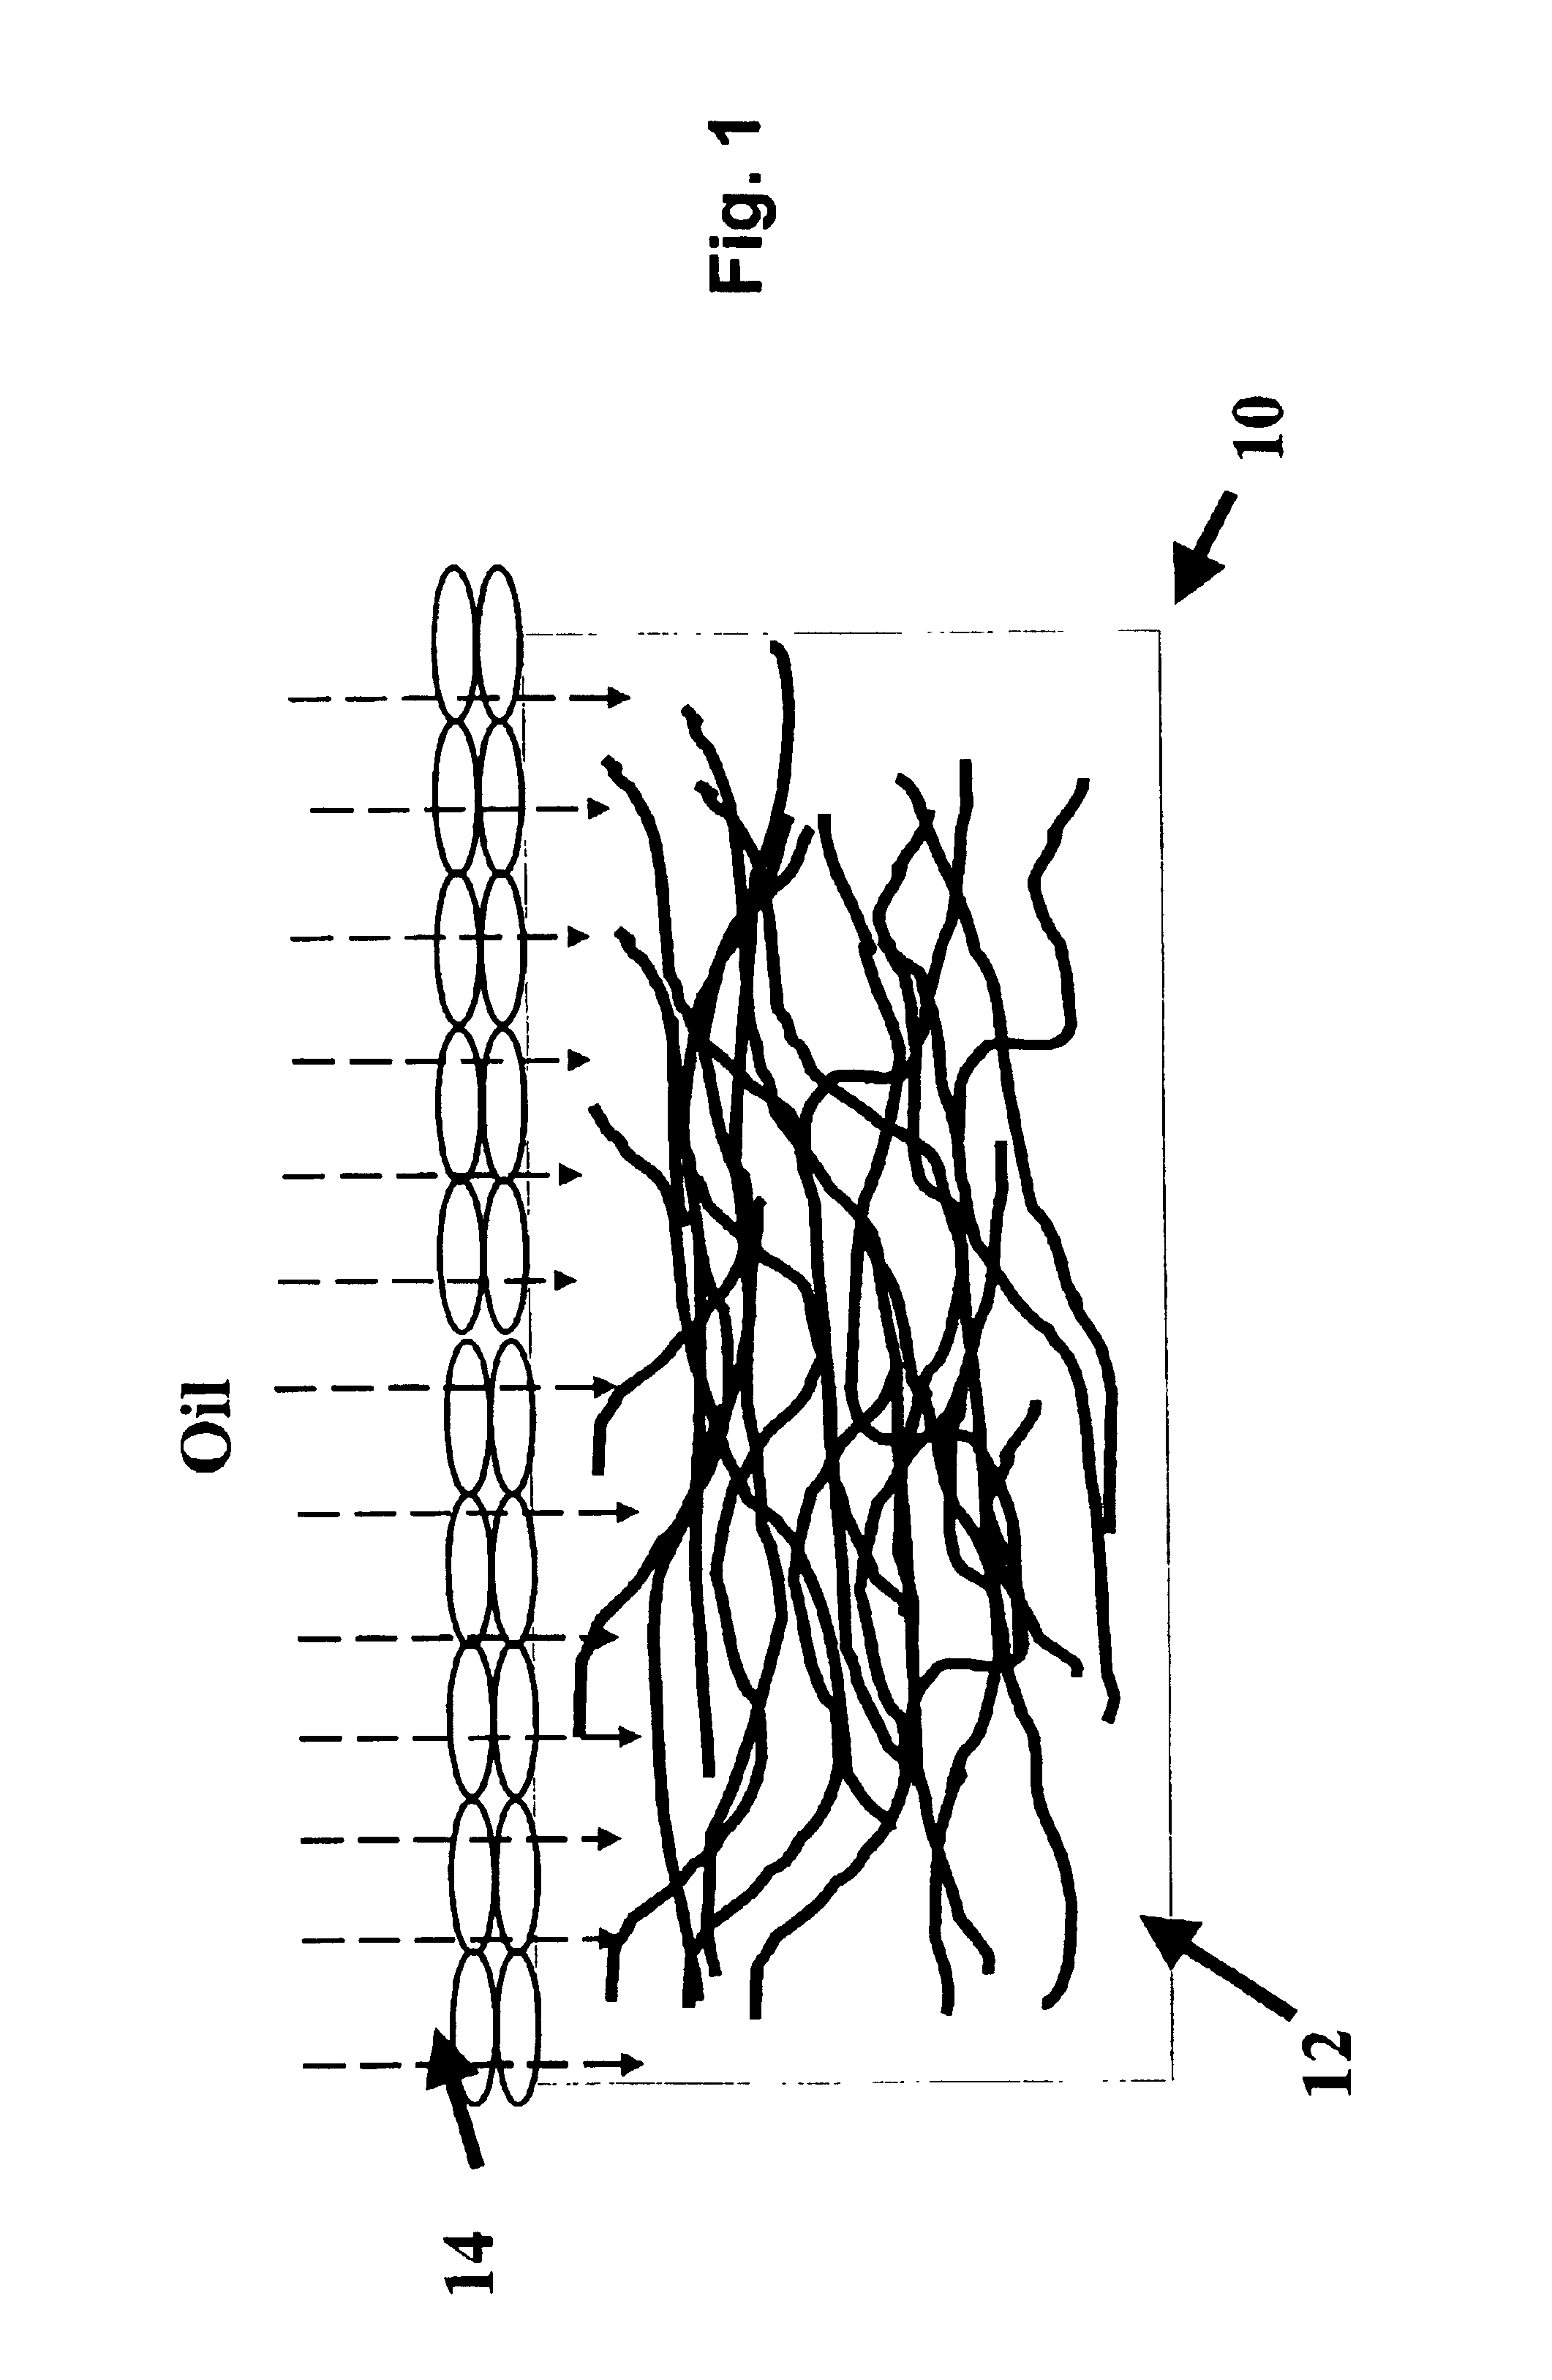 Friction material with friction modifying layer having symmetrical geometric shapes